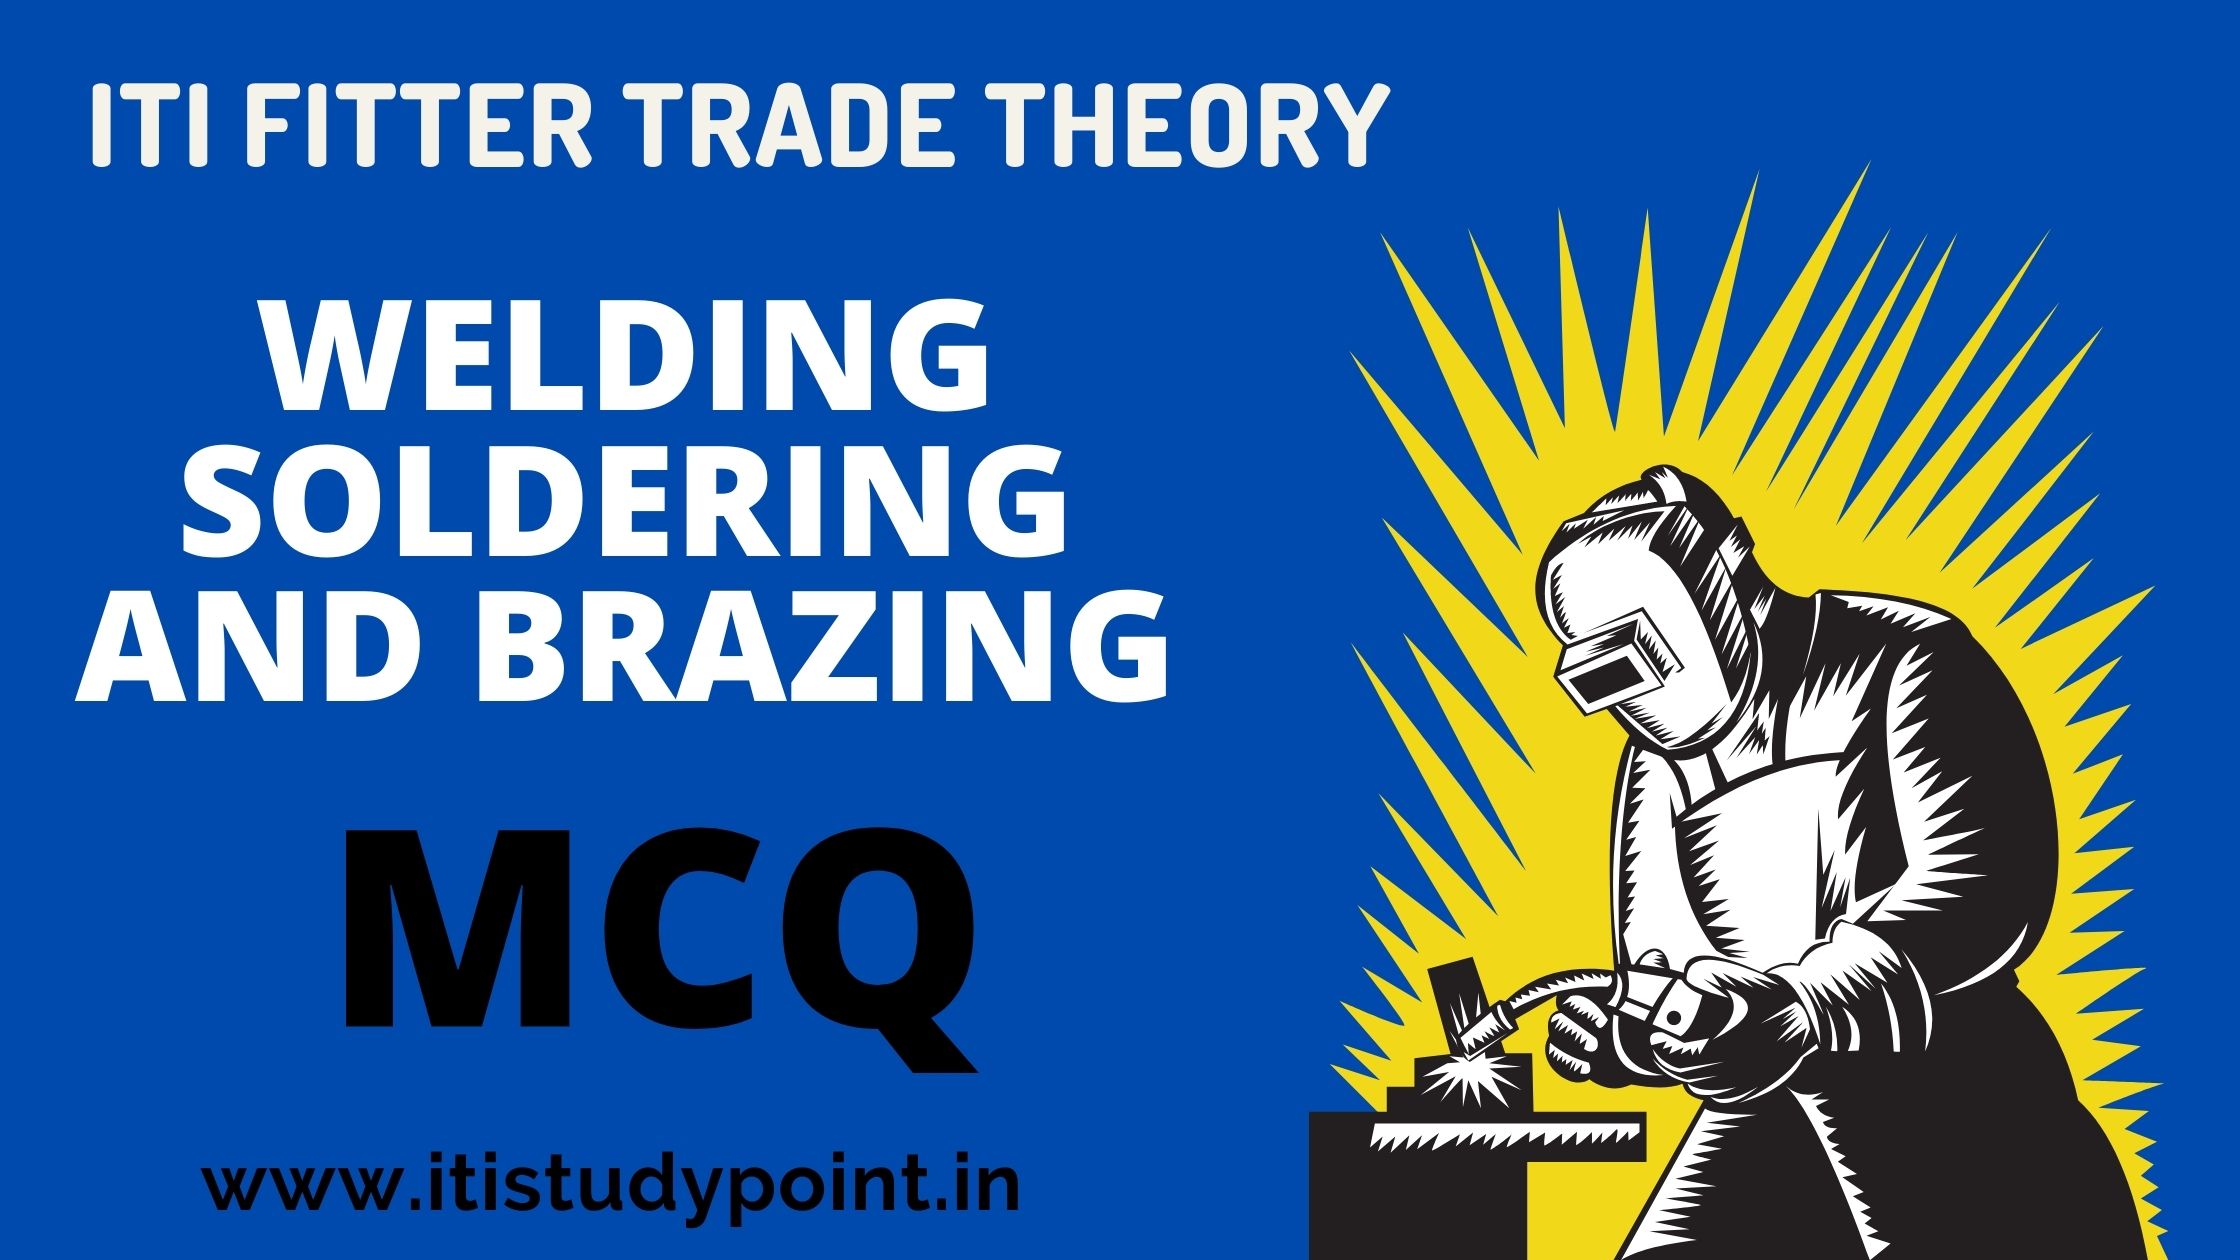 WELDING SOLDERING AND BRAZING MCQ 2